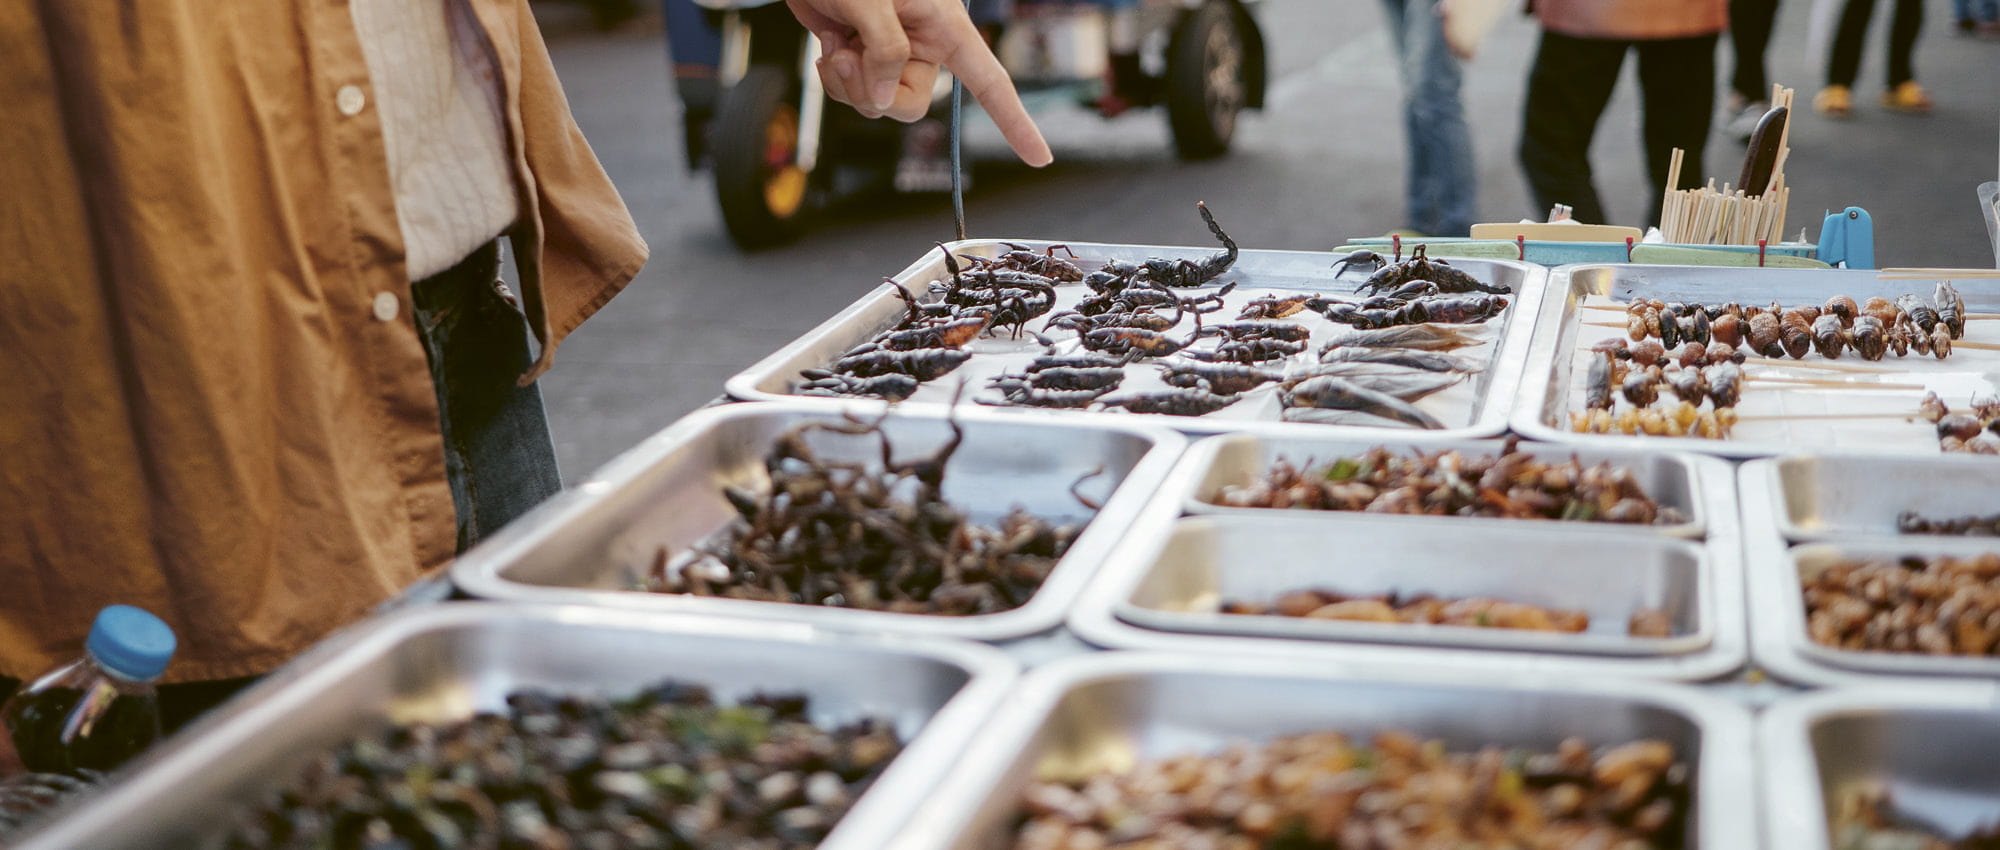 A man at a market points a finger at insects on display. Copyright: iStock/staticnak1983